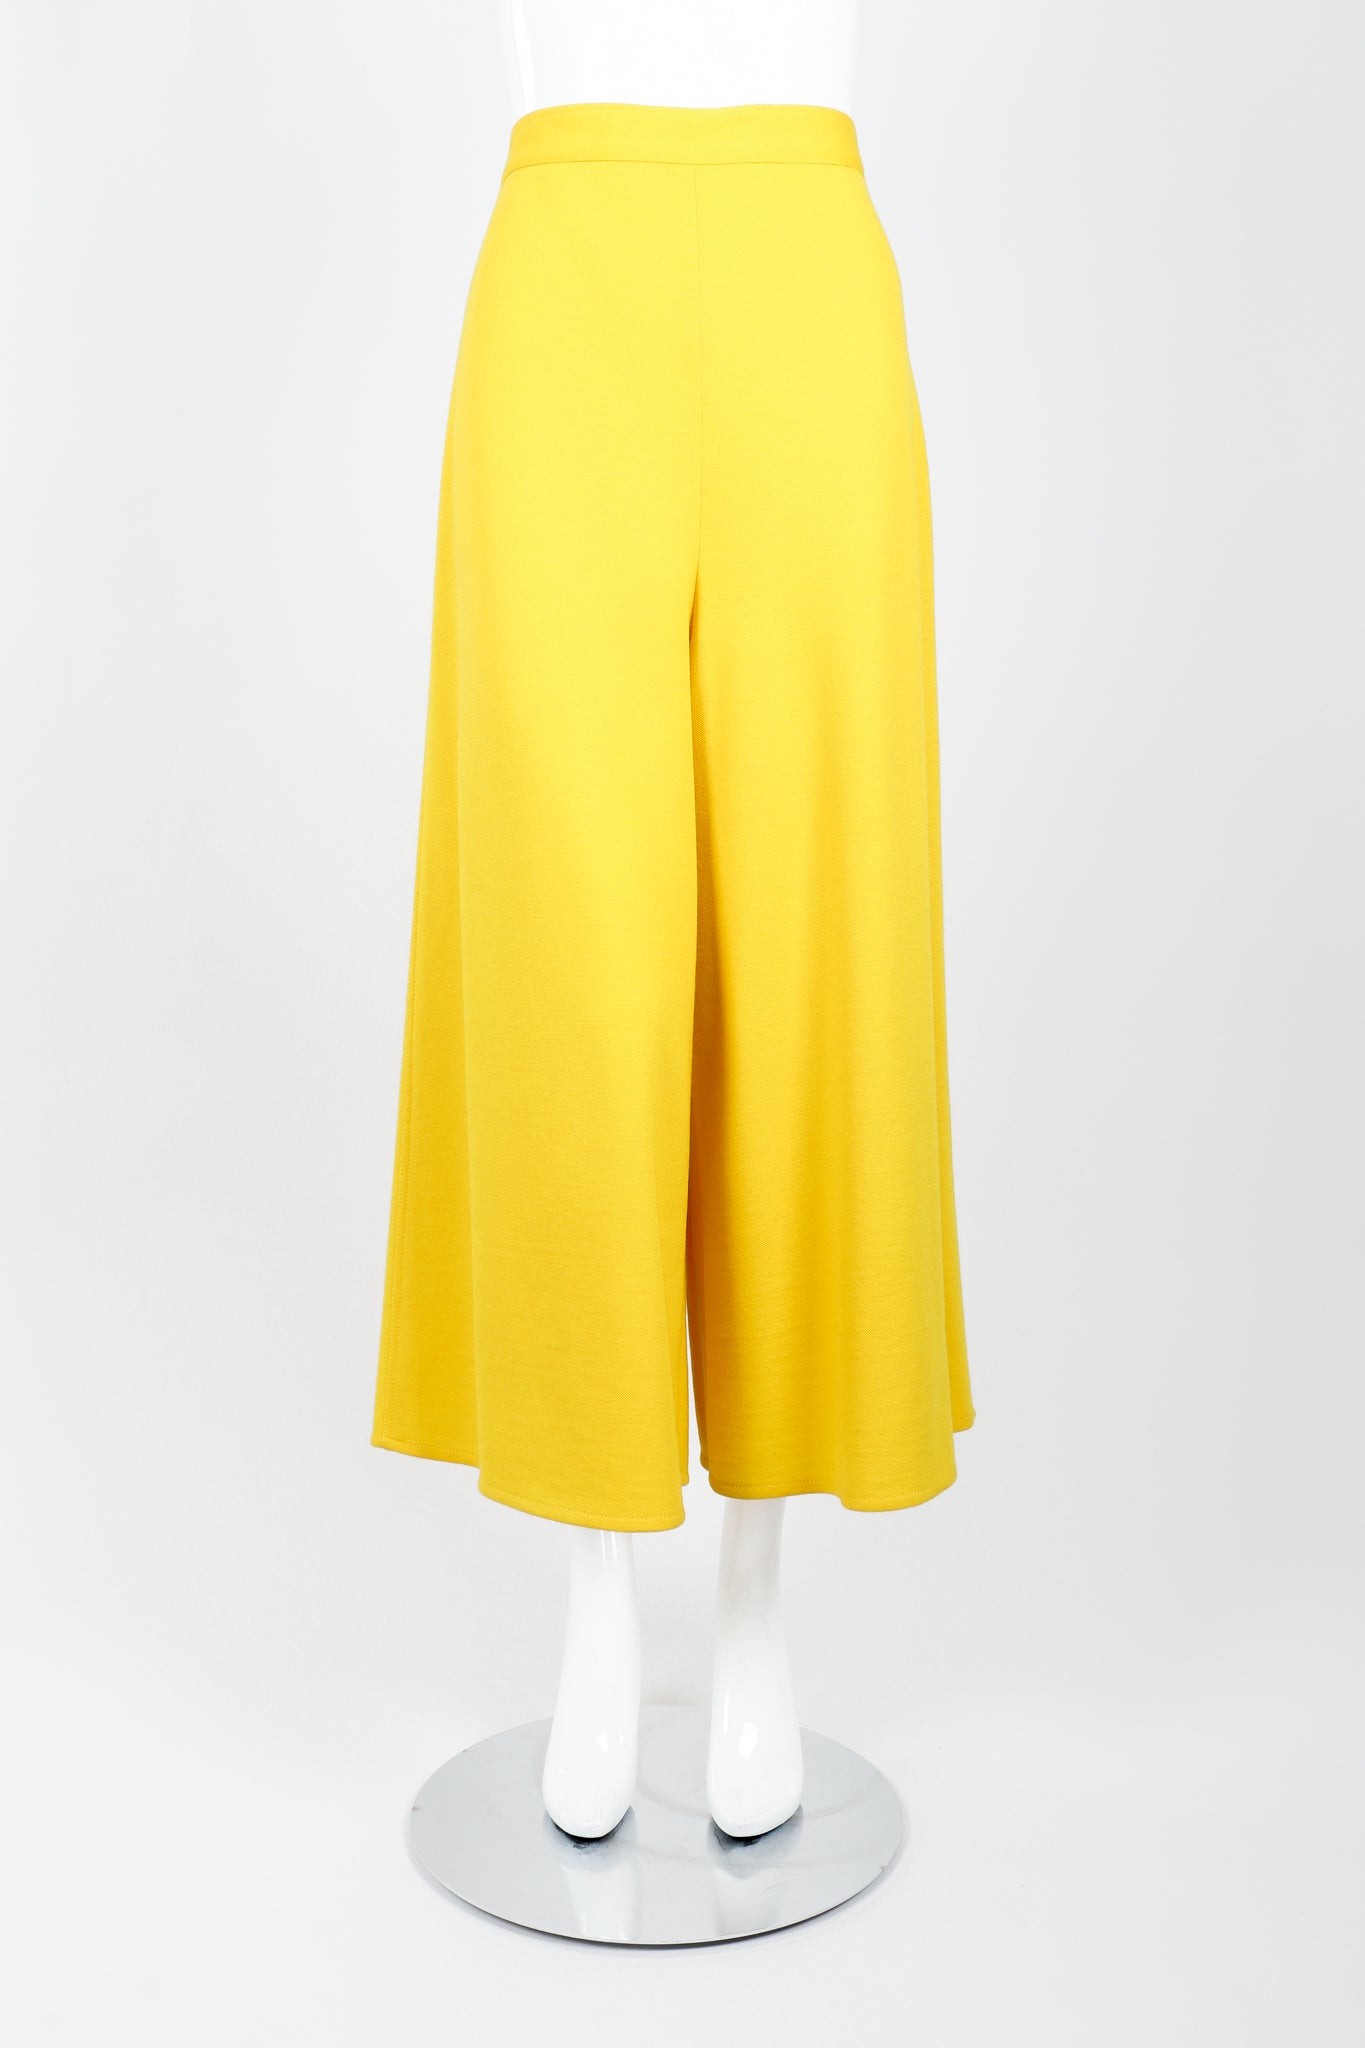 Vintage Sonia Rykiel Yellow Knit Gaucho Pant on Mannequin Front at Recess Los Angeles